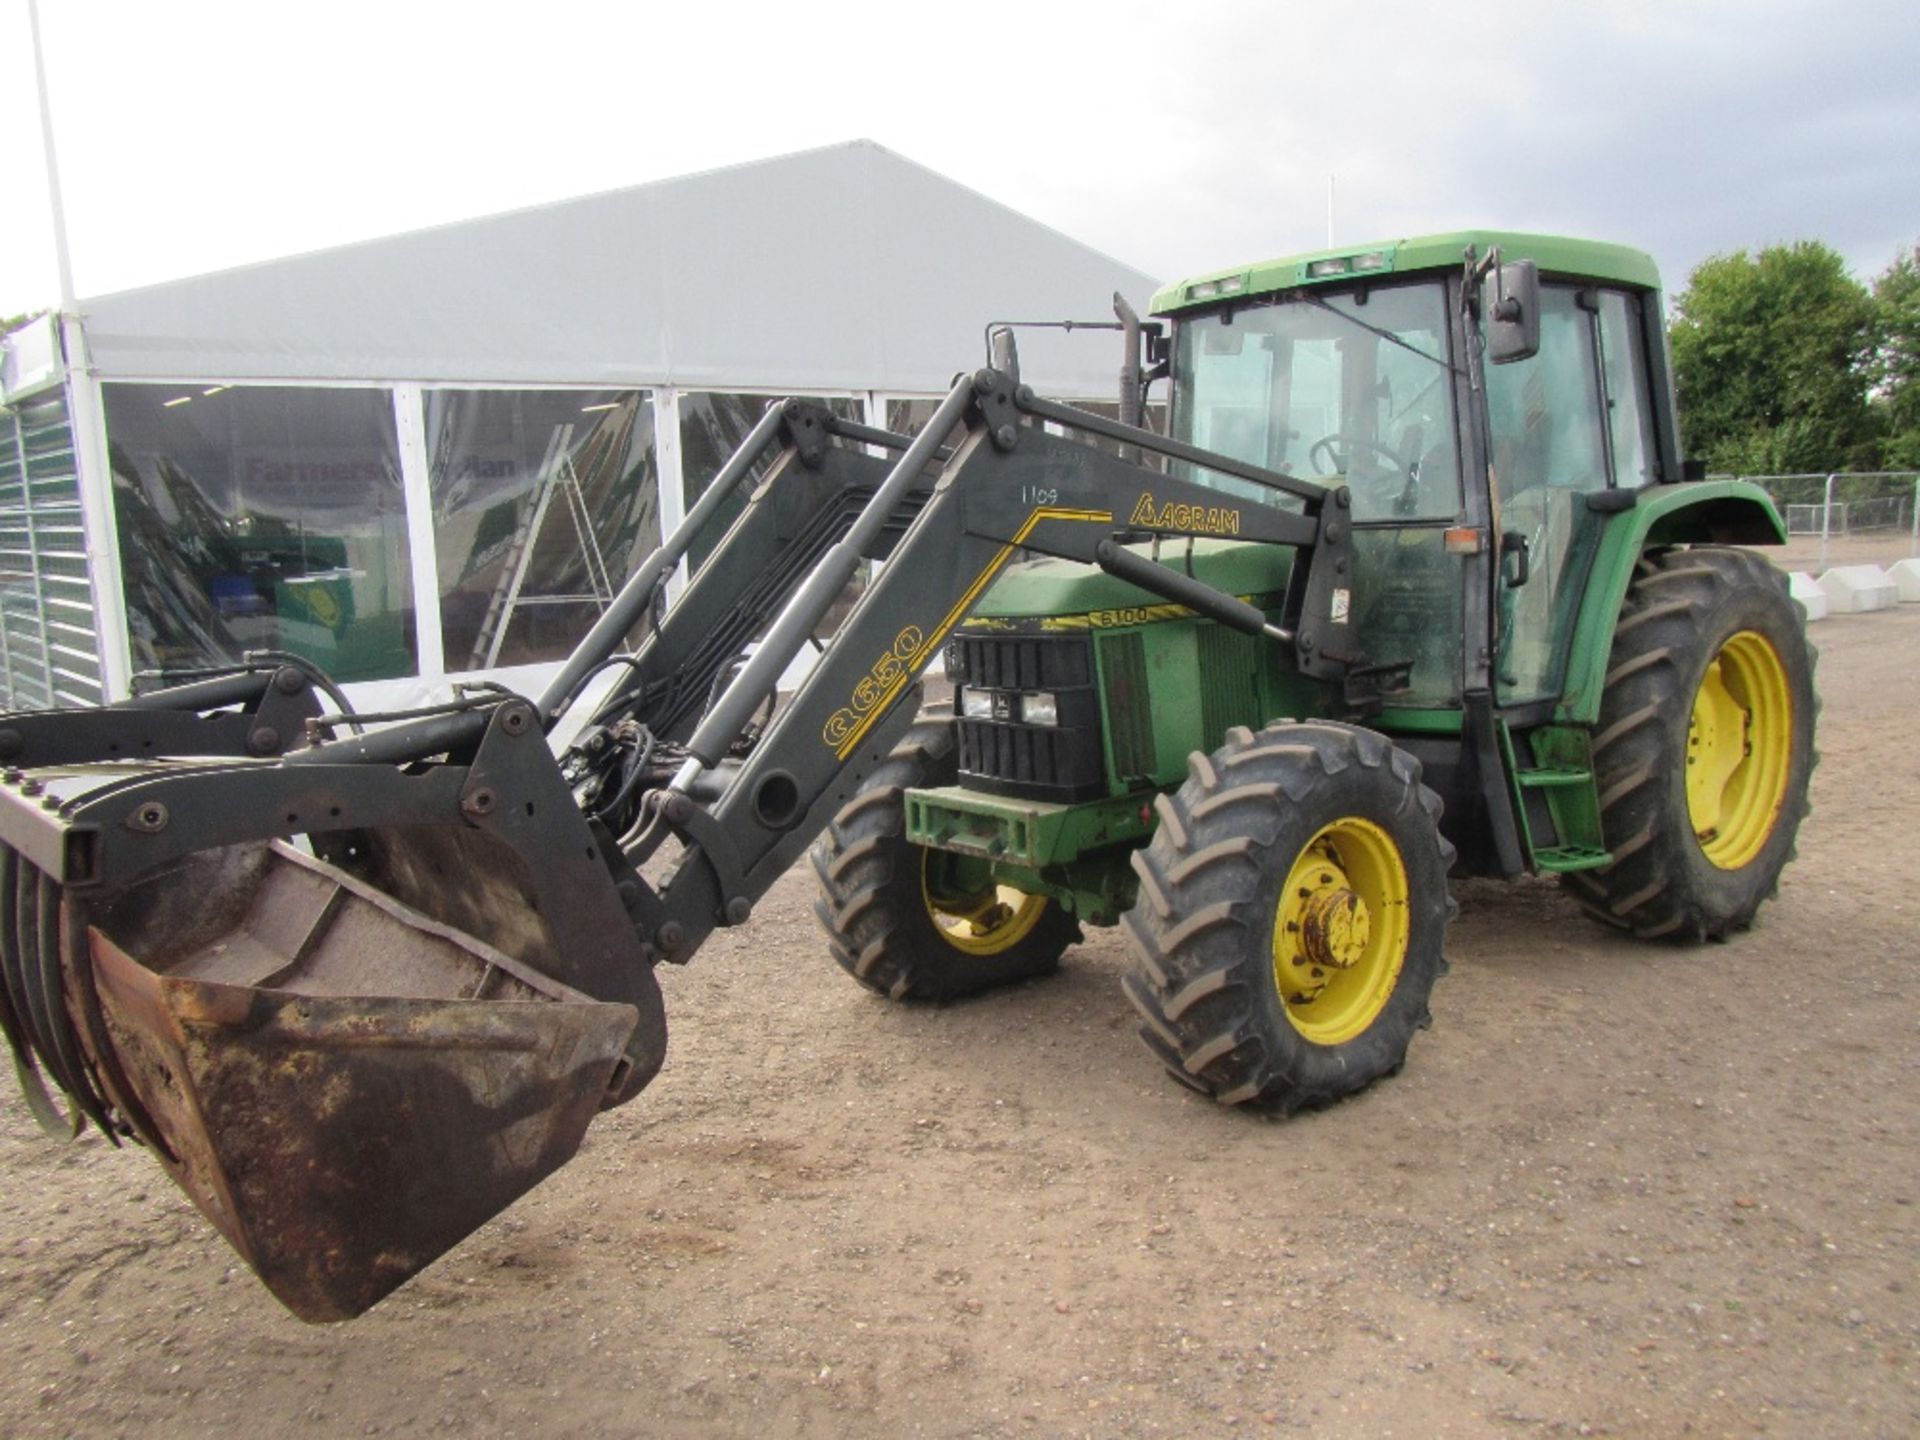 John Deere 6100 Power Quad Tractor with Loader. Reg Docs will be supplied Ser No 156383